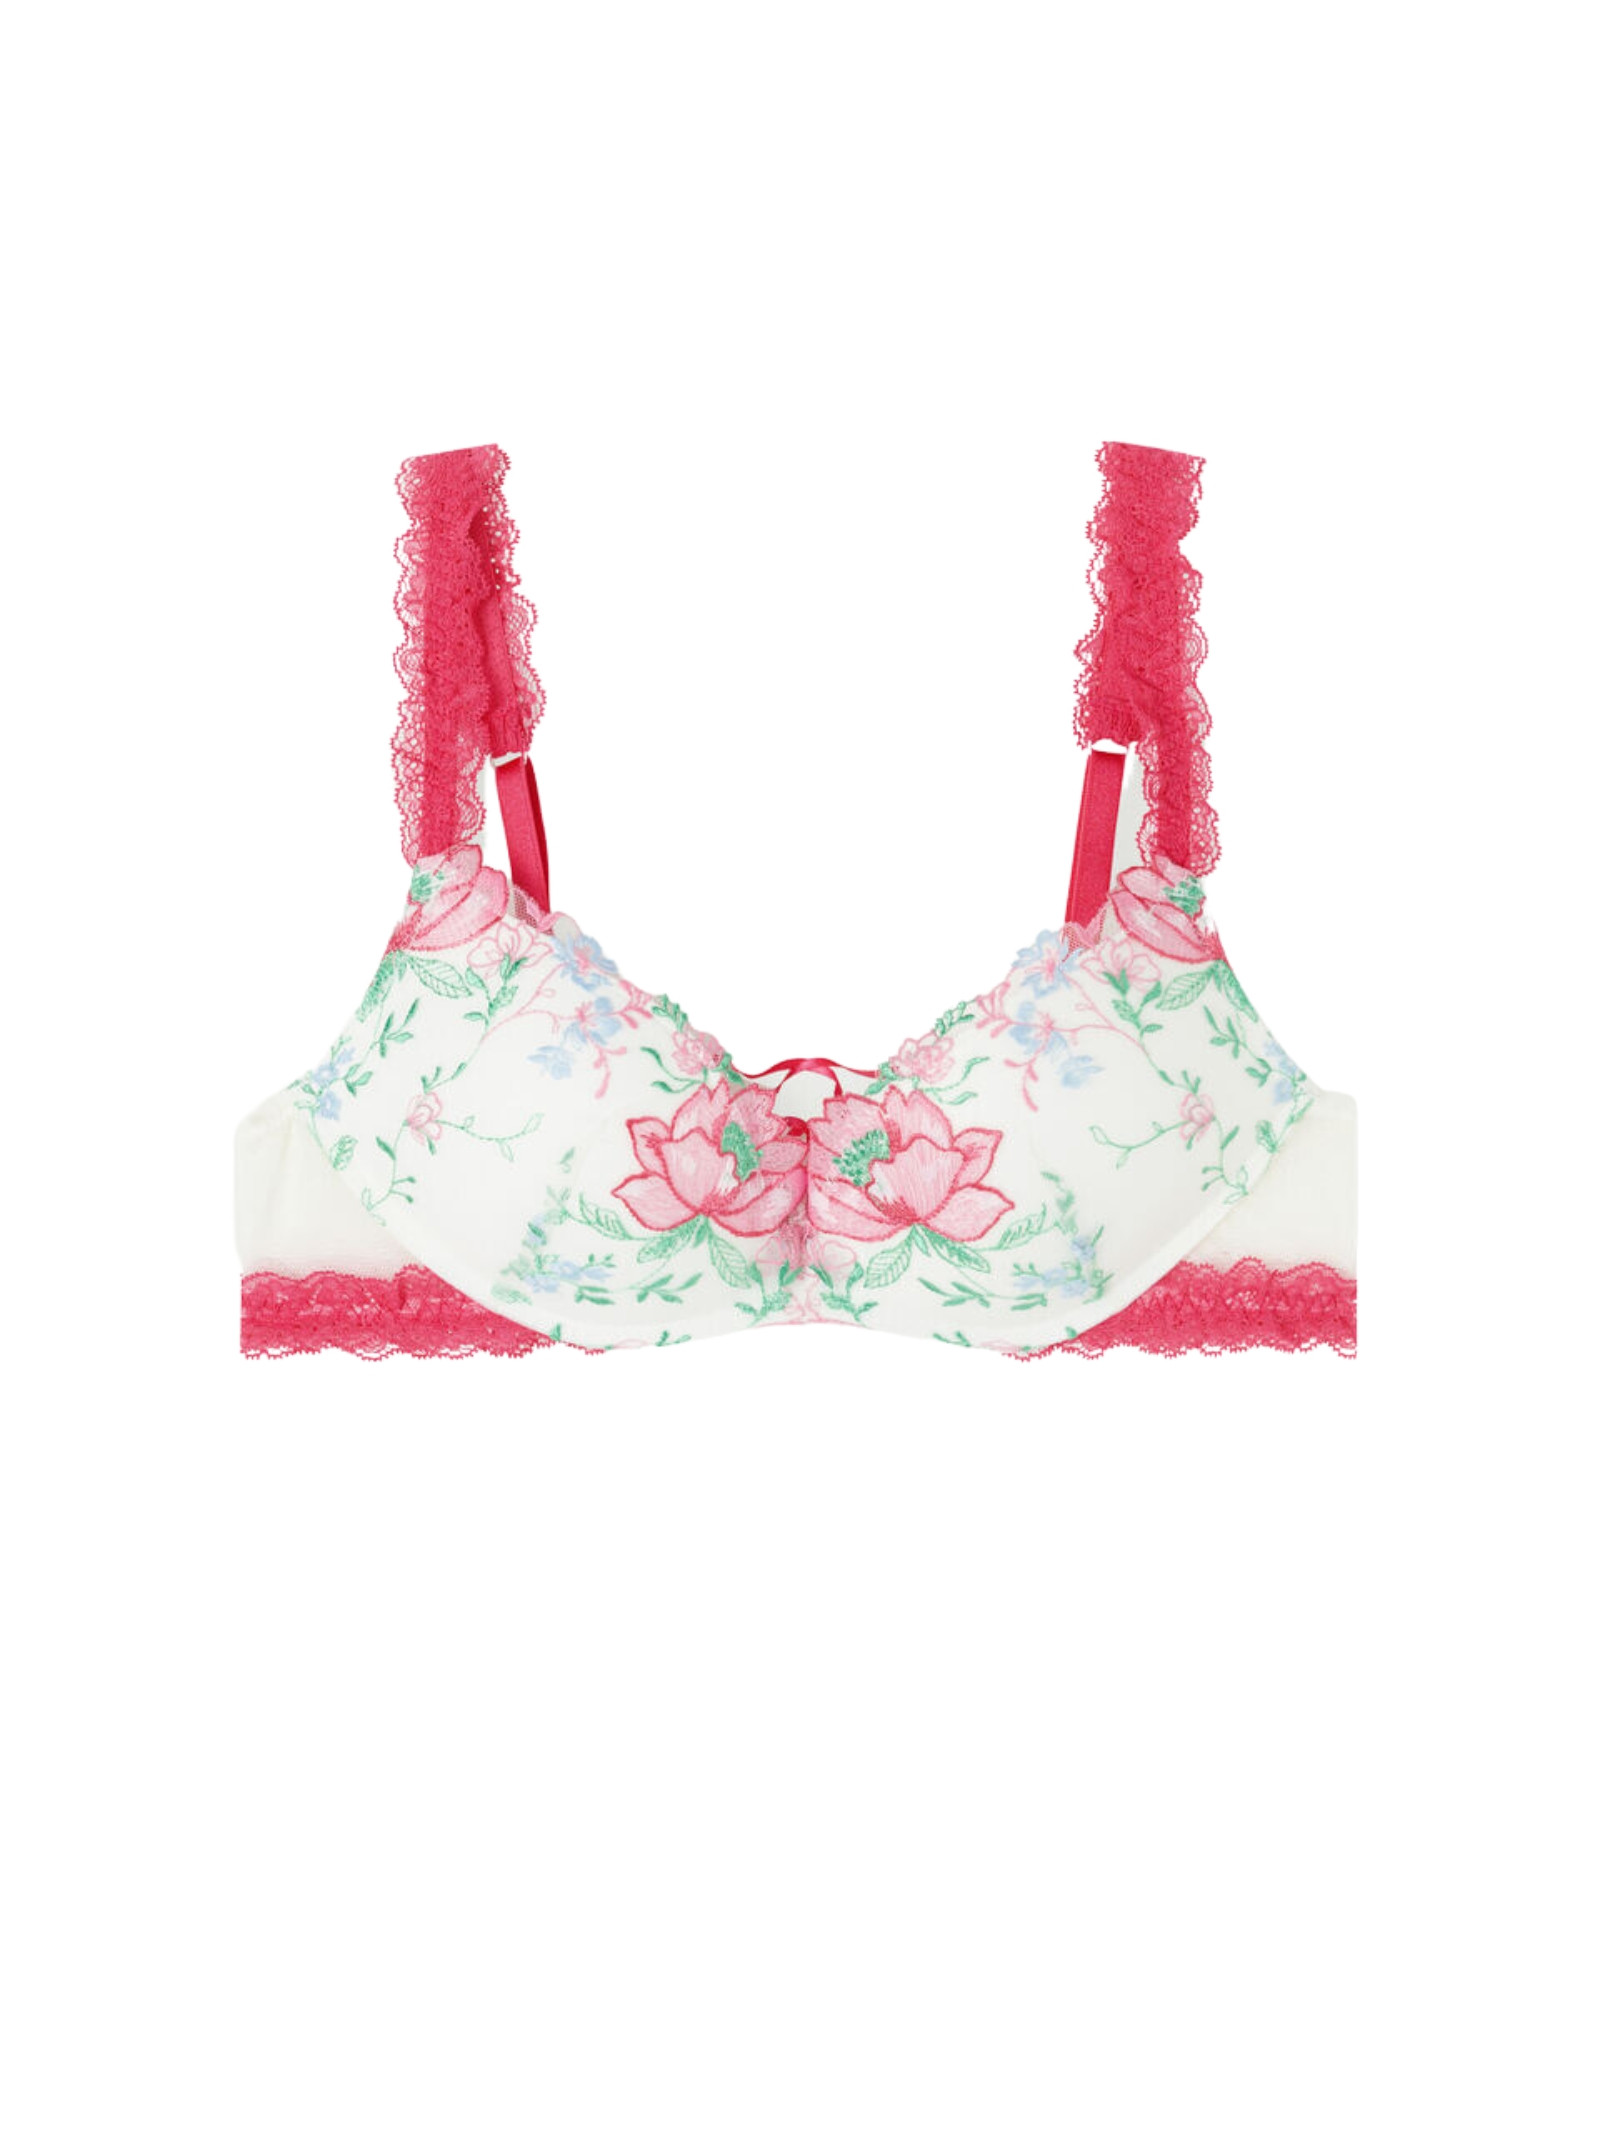 Sutiã Super Push-Up Gioia Obsessed With Floral - Rosa - Shop2gether